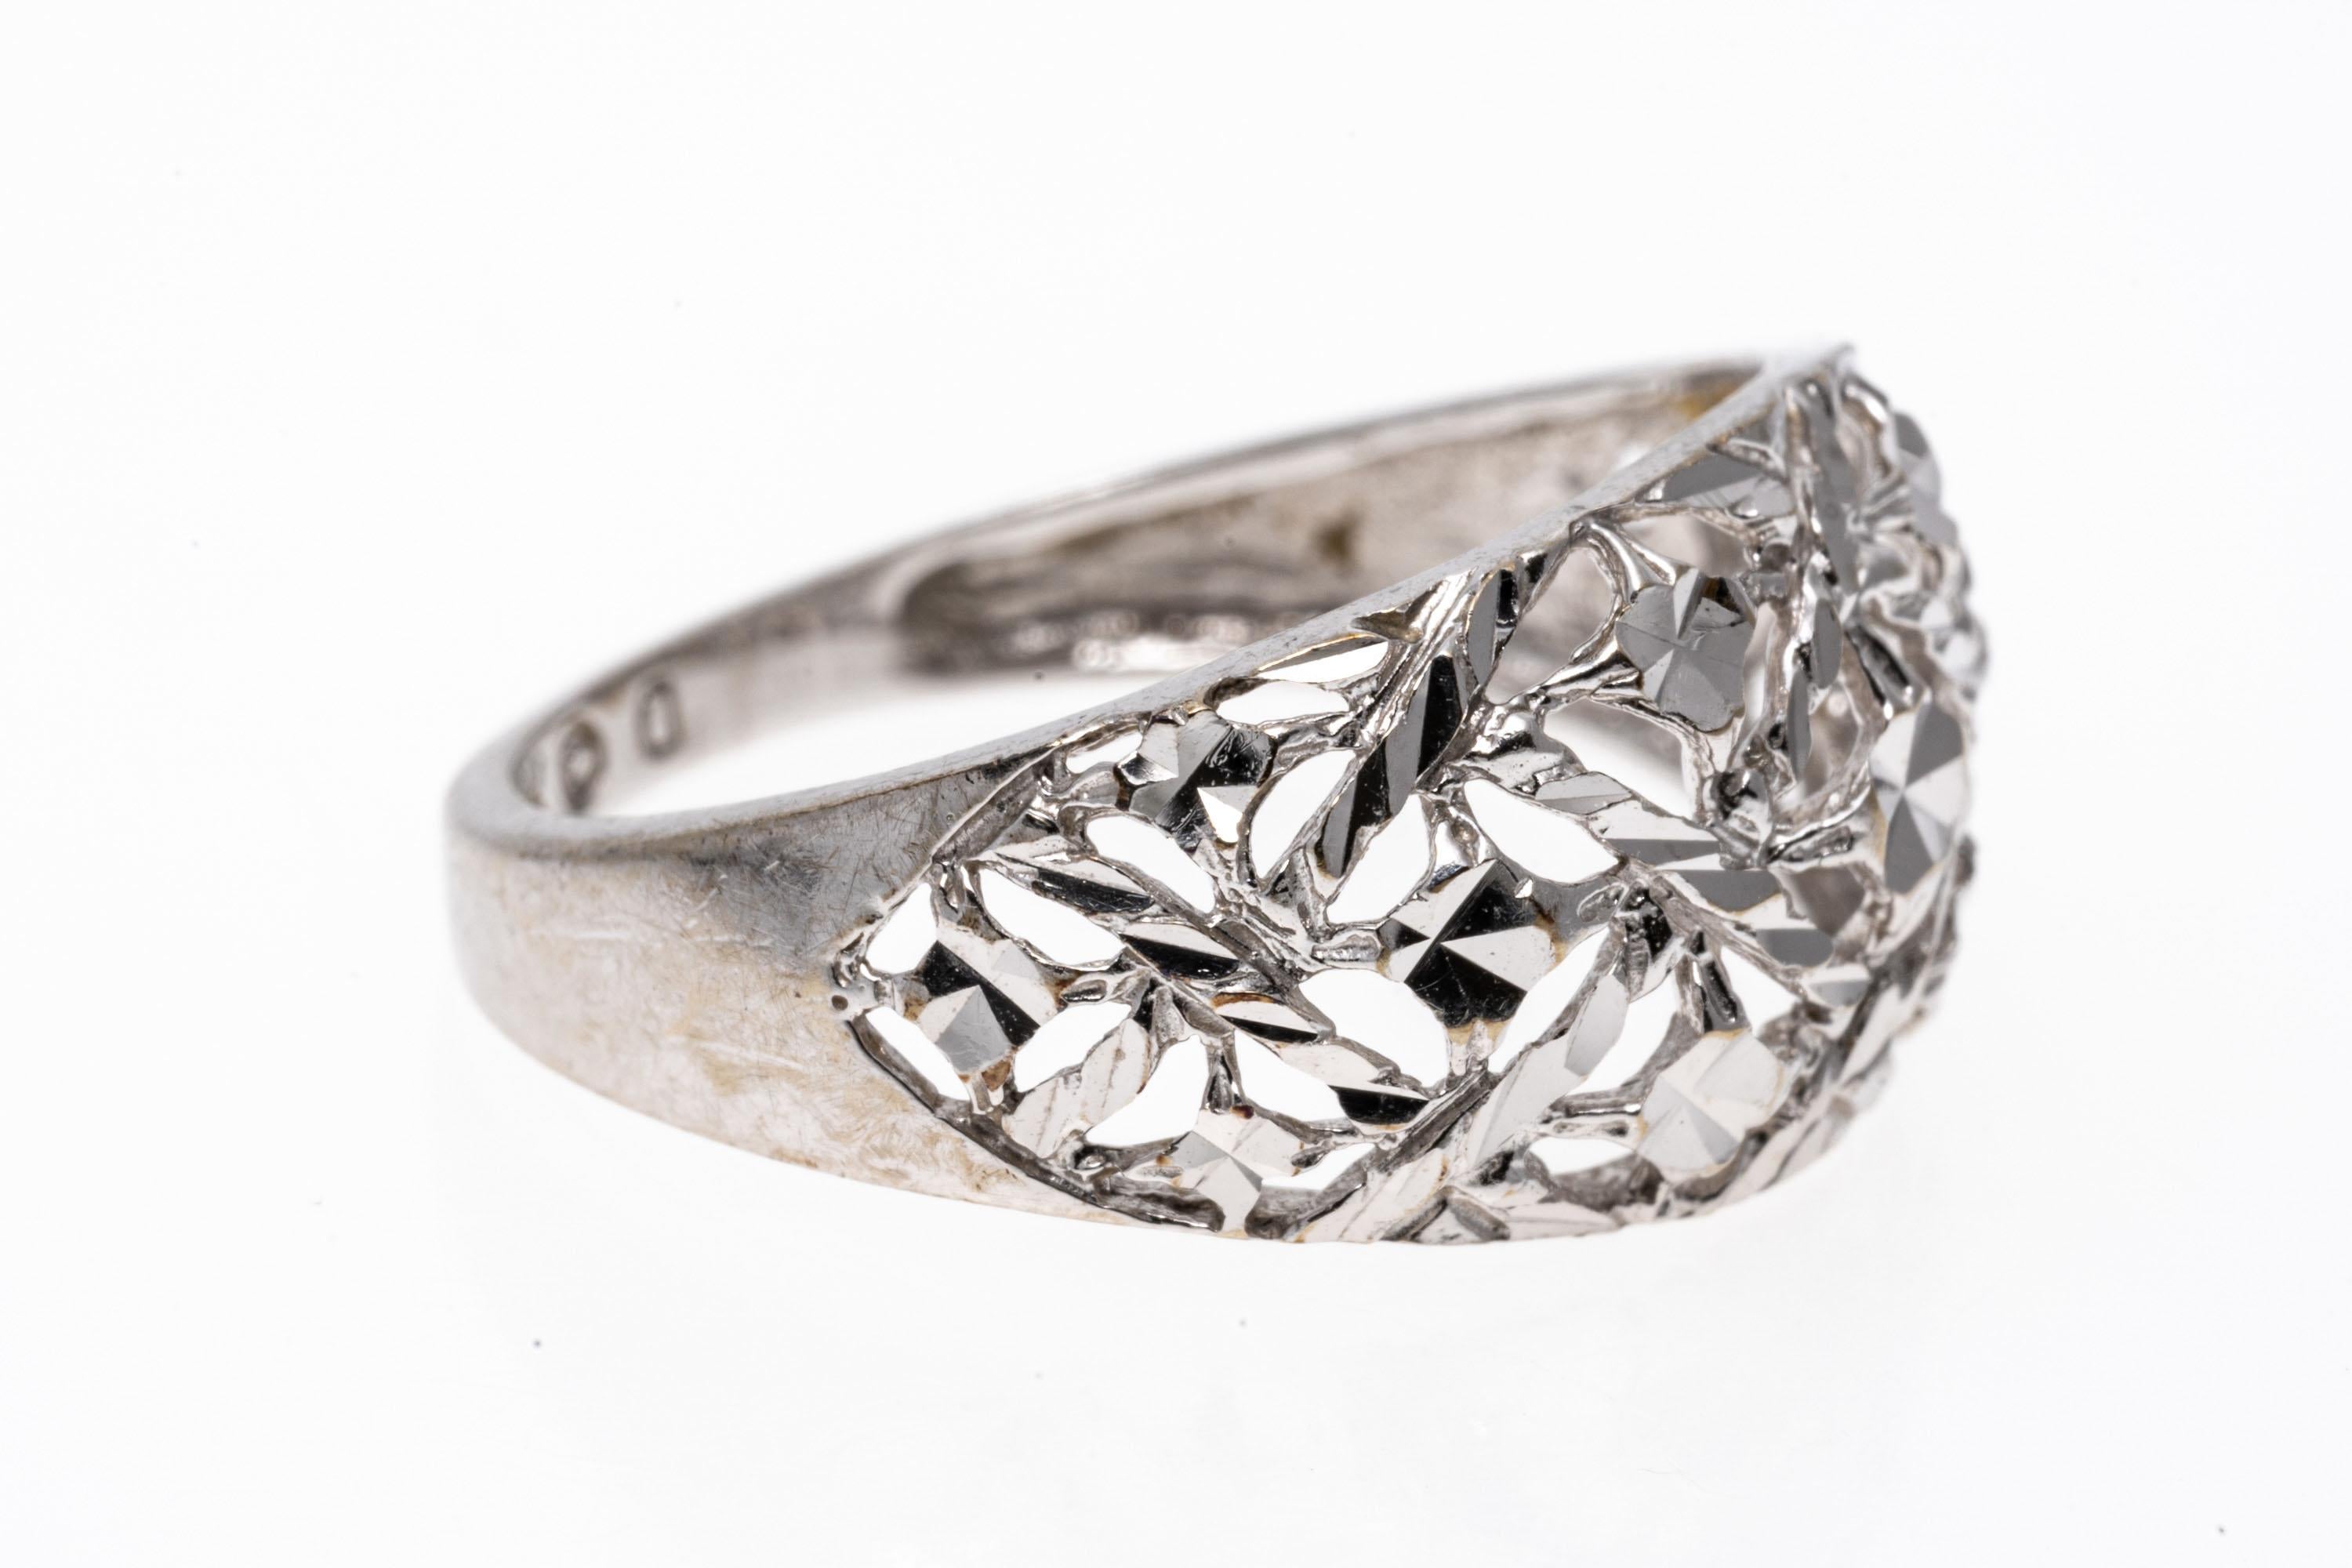 10k white gold ring. This pretty, sparkly ring is a dome style, set with a lattice style top which is accented by diamond cuts.
Marks: 10k
Dimensions: 3/4